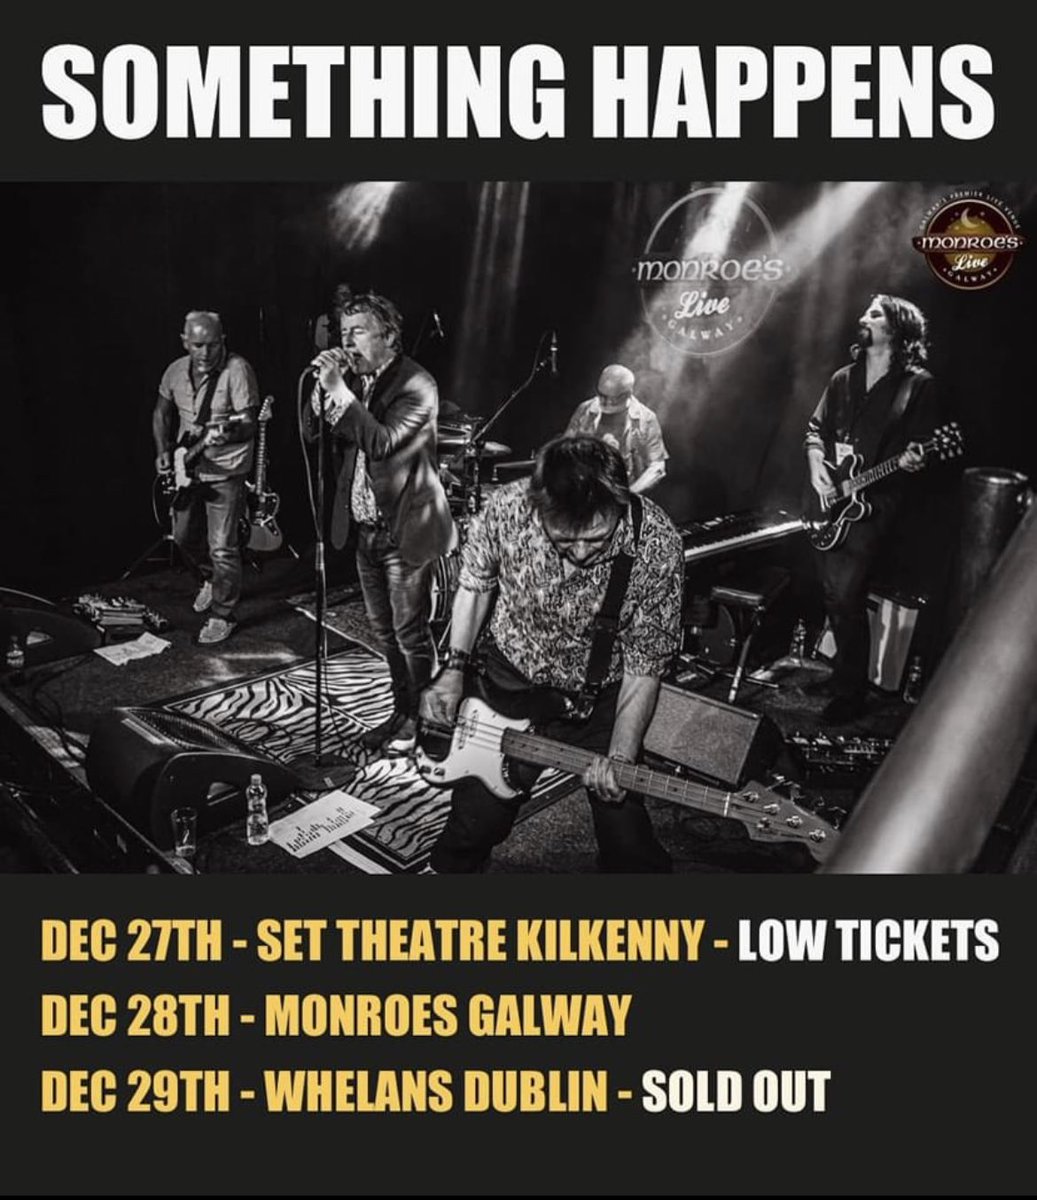 We are really looking forward to these shows … it has been a while @RHMusik @tomhappens @alanconnormusic @marmosets #happens